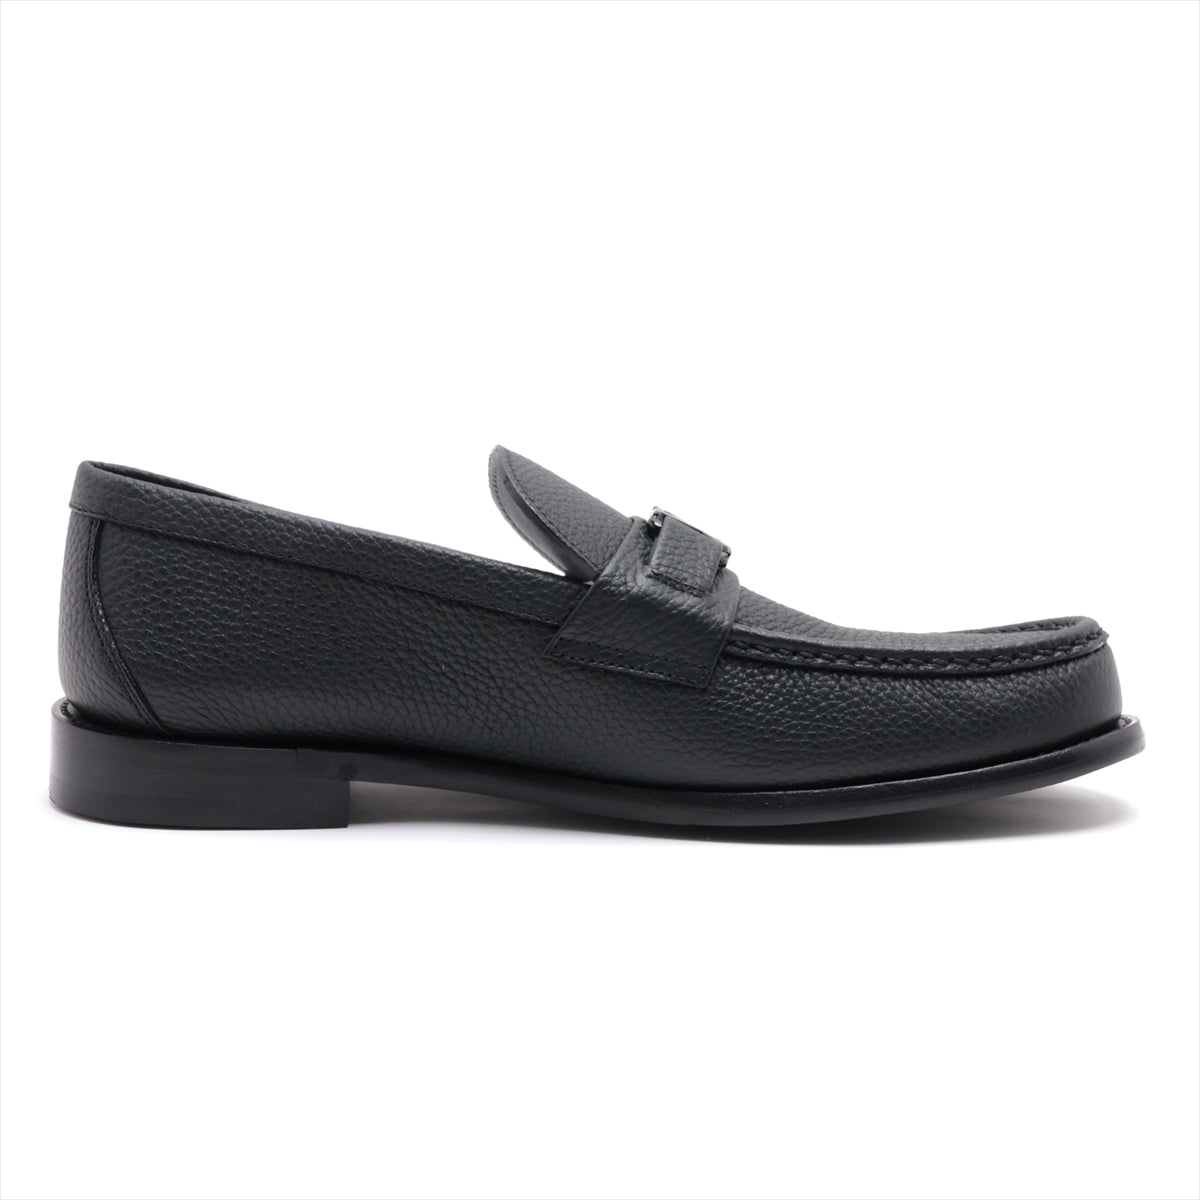 Louis Vuitton Major line 23 years Leather Loafer 8.5 Men's Black ND1213 LV Logo Box There is a storage bag